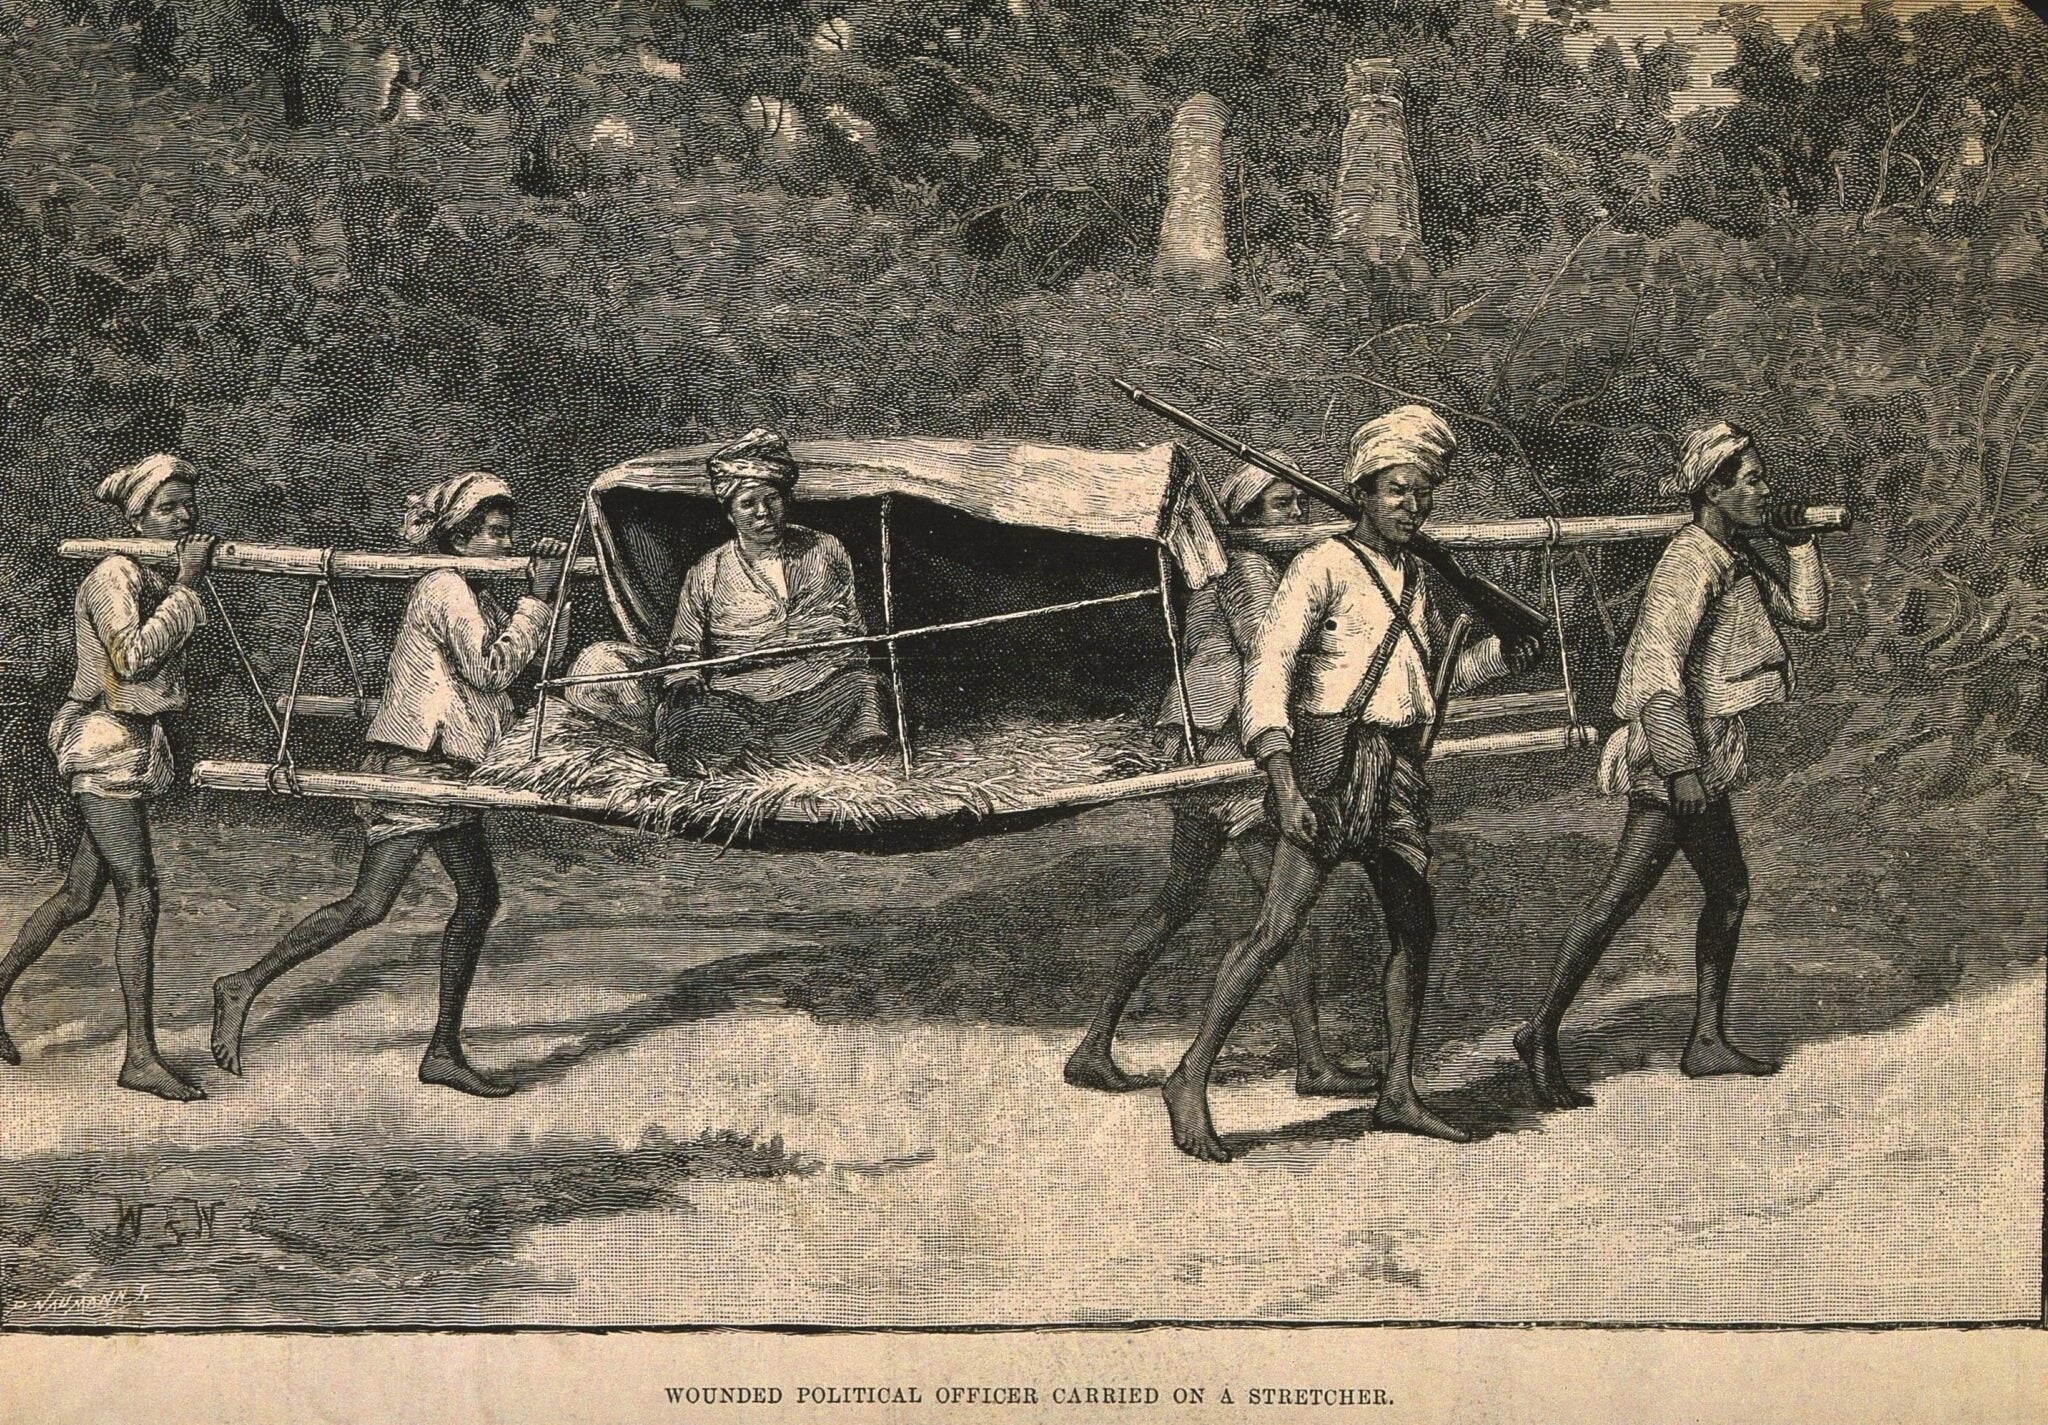 1889 illustration of a wounded political officer being carried on a stretcher